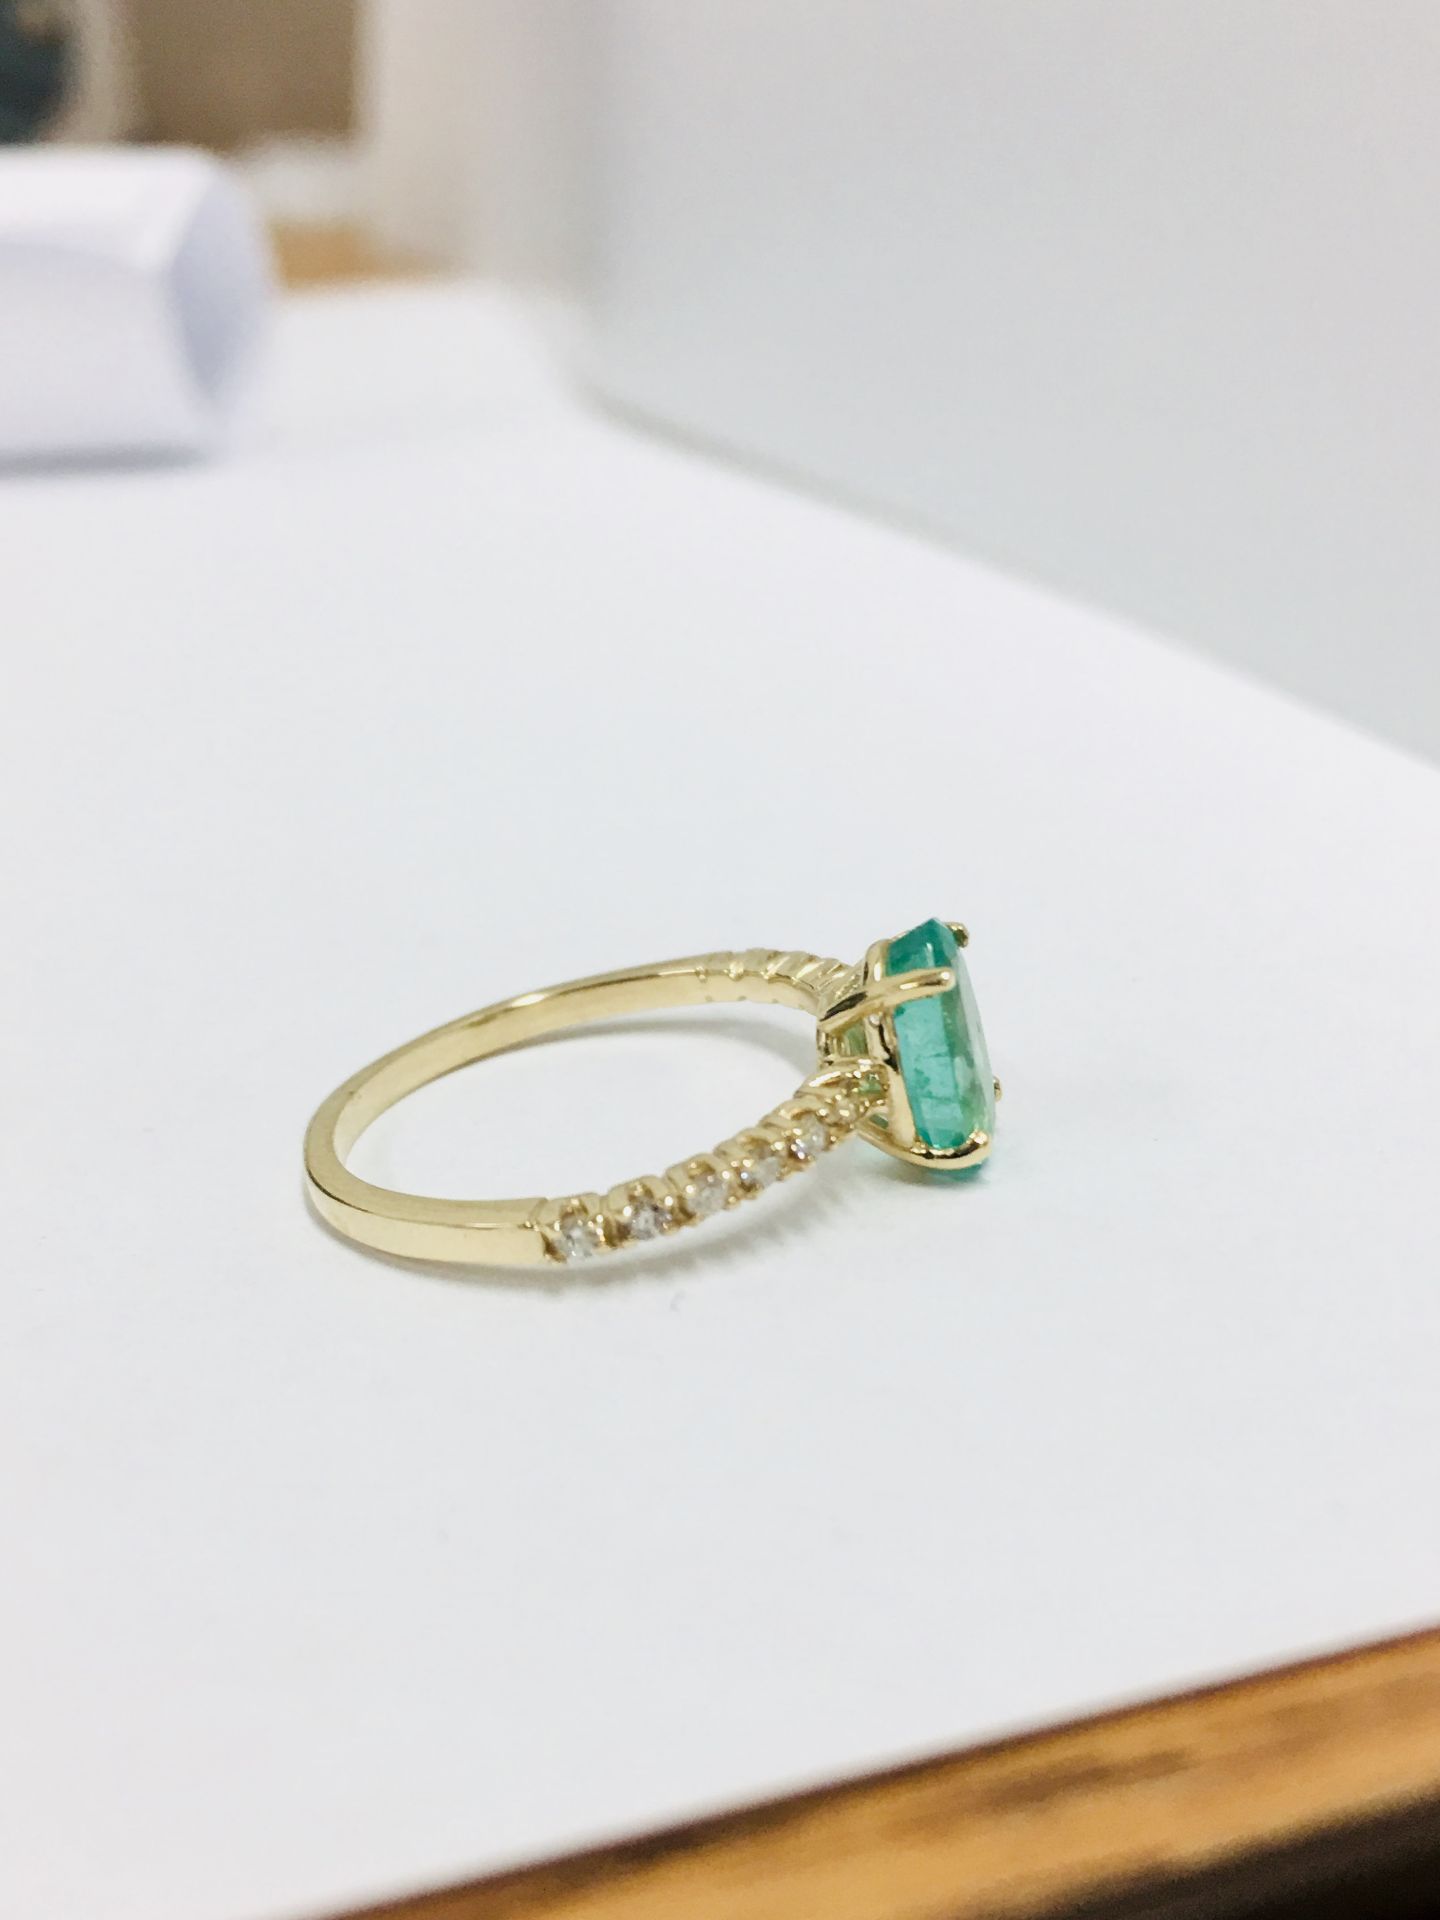 0.80Ct / 0.12Ct Emerald And Diamond Dress Ring. - Image 4 of 4